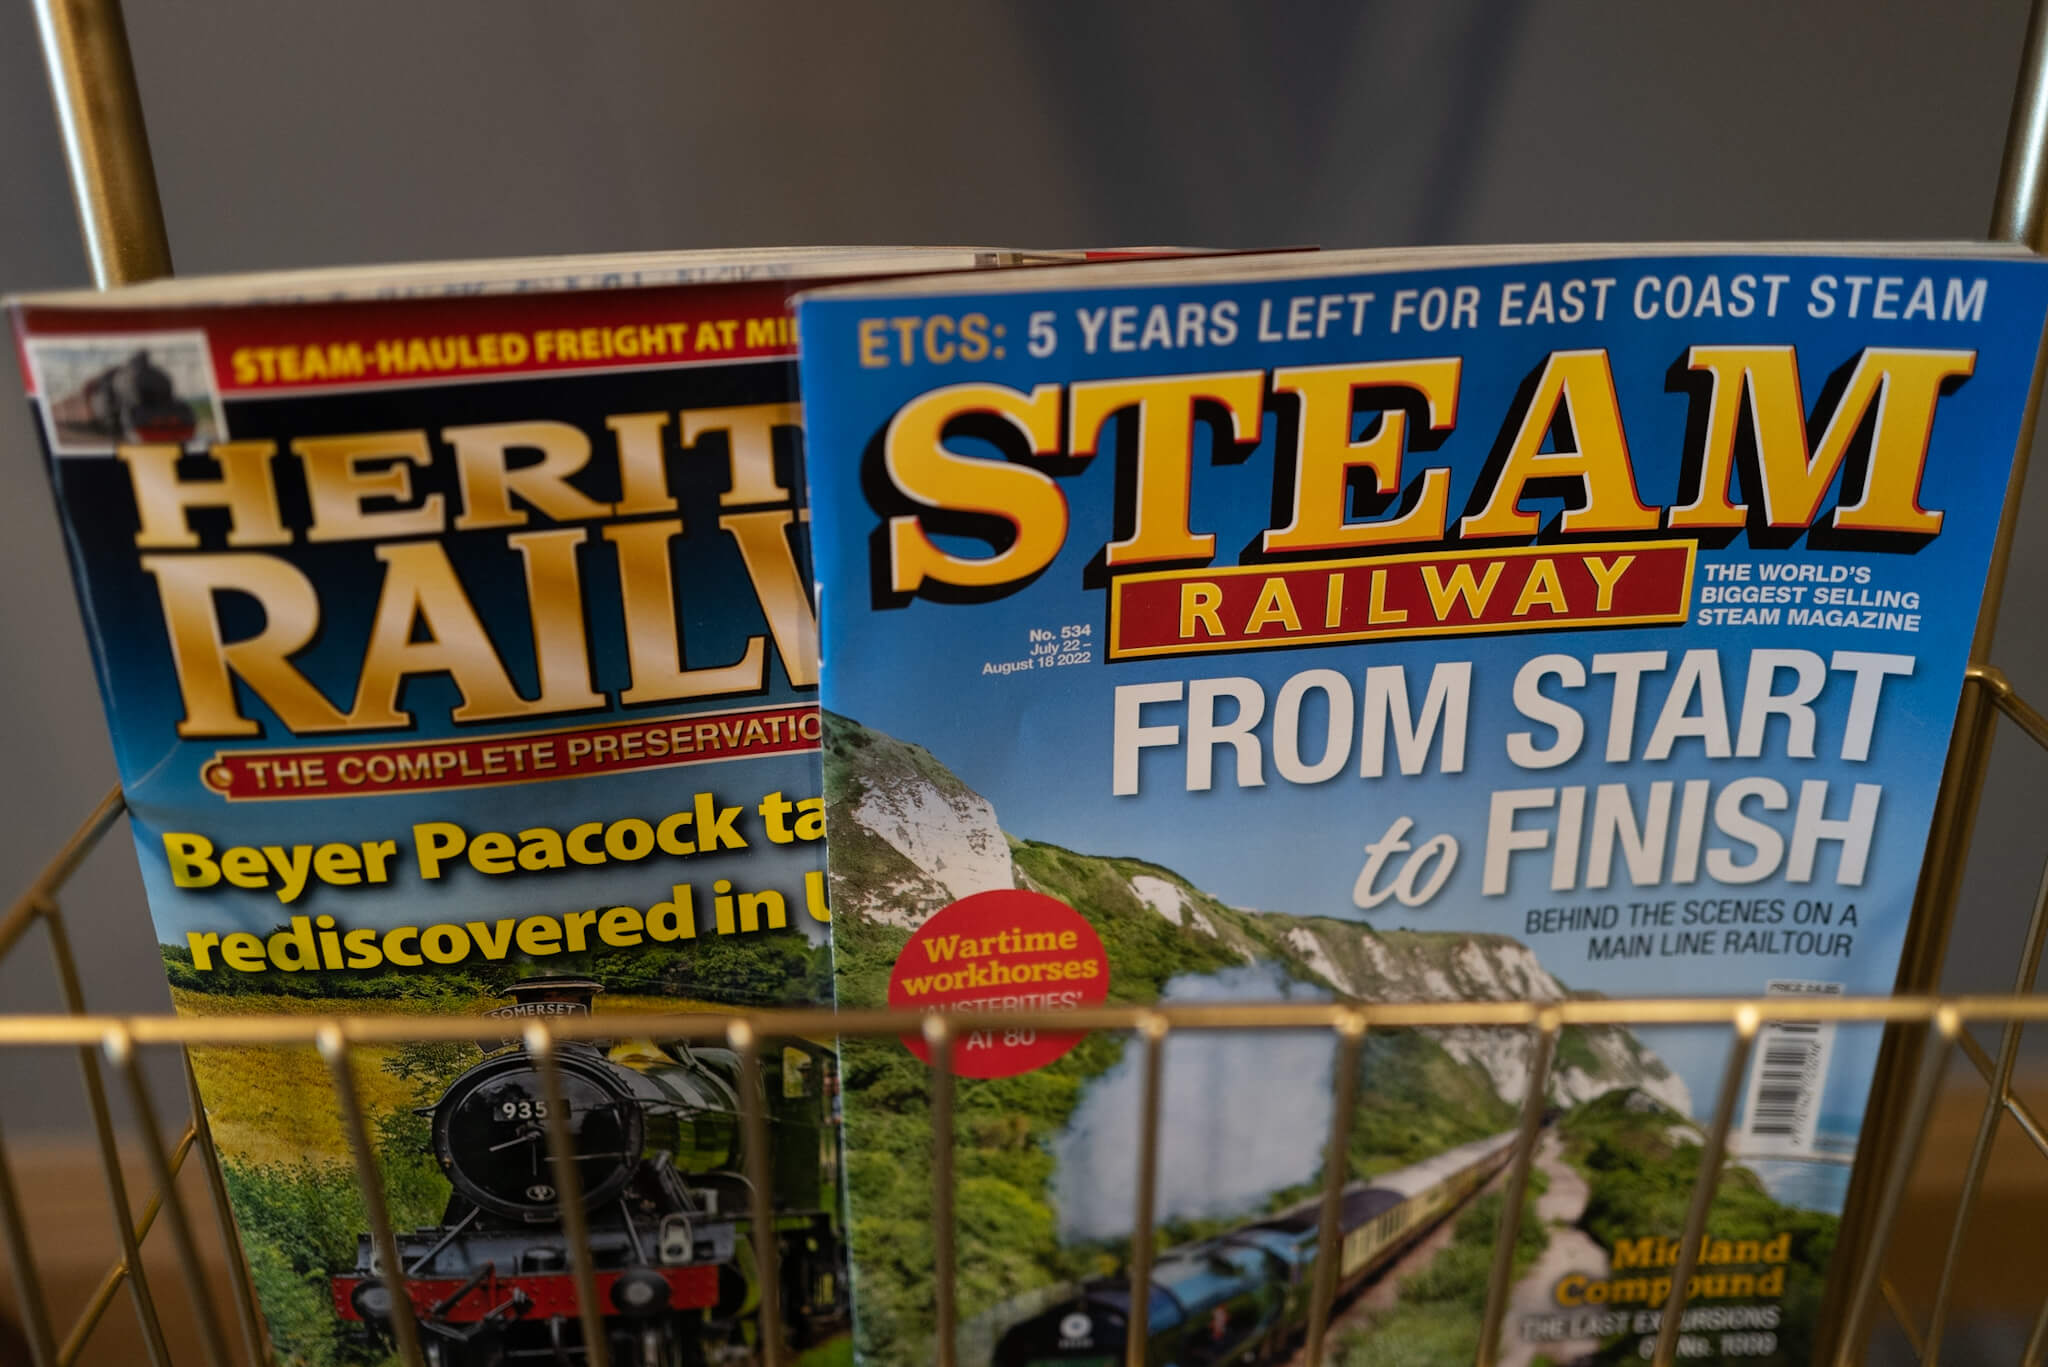 Two magazine about trains.